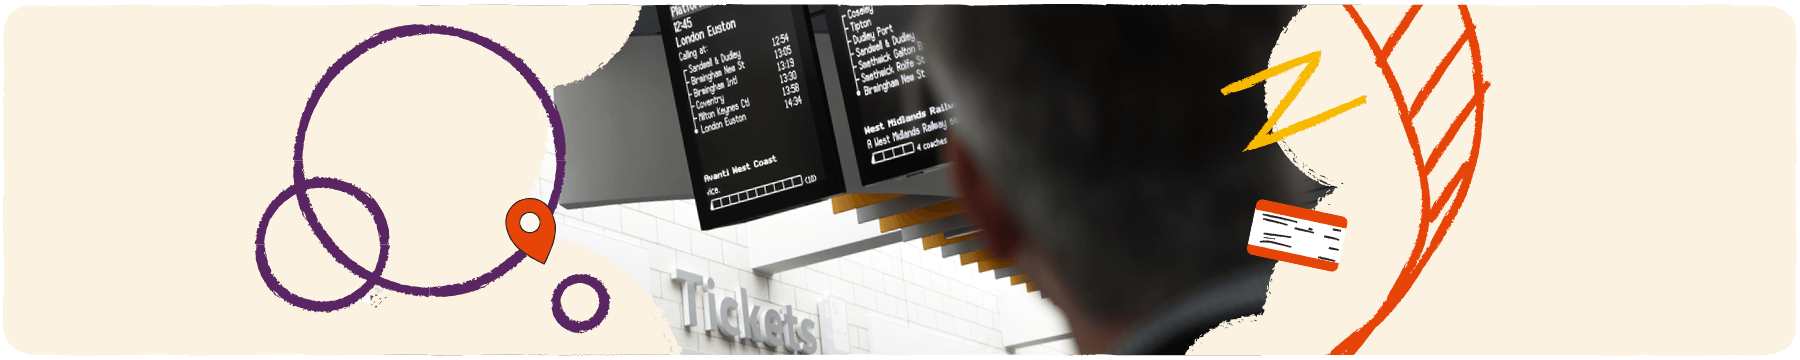 Passenger looking at a departure and arrivals board